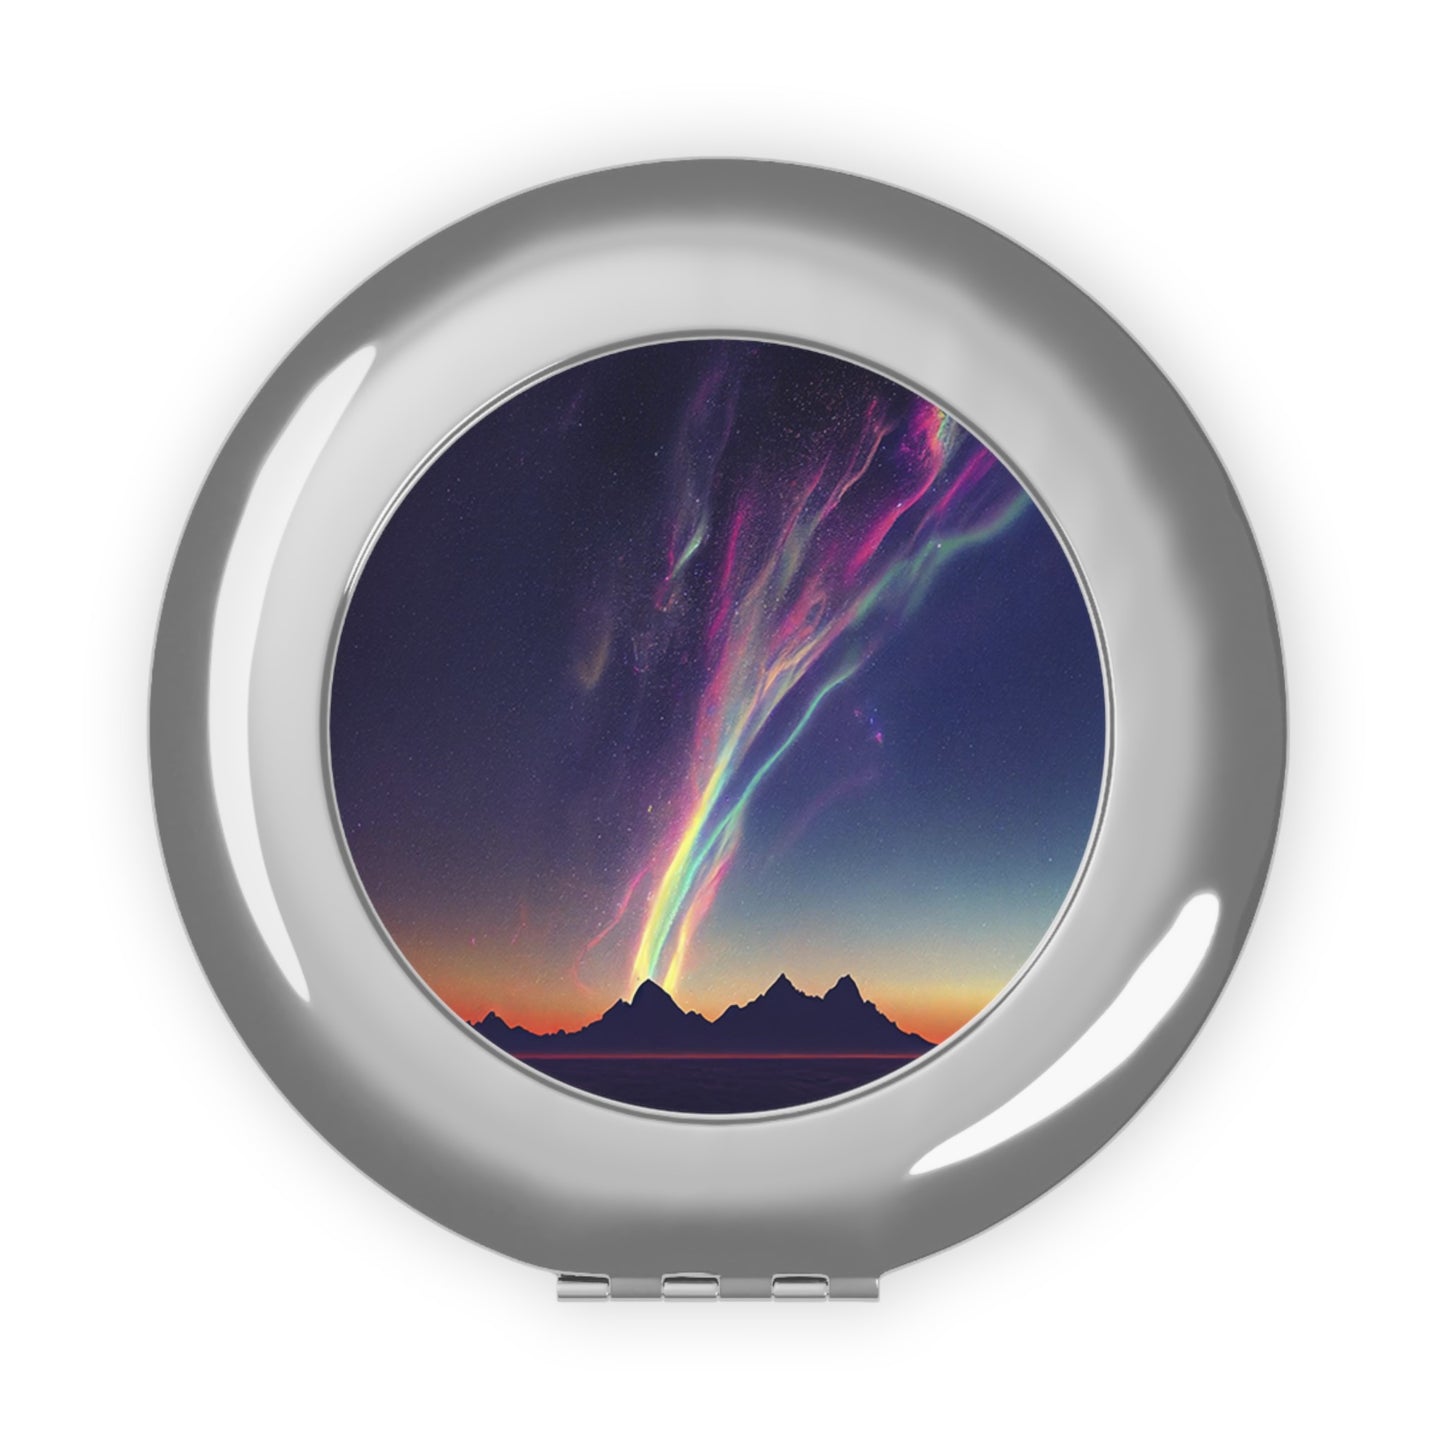 Unique Aurora Borealis Compact Travel Mirror - Northern Light Travel Accessories - Glossy Makeup Gadget - Perfect Aurora Lovers Gift 4